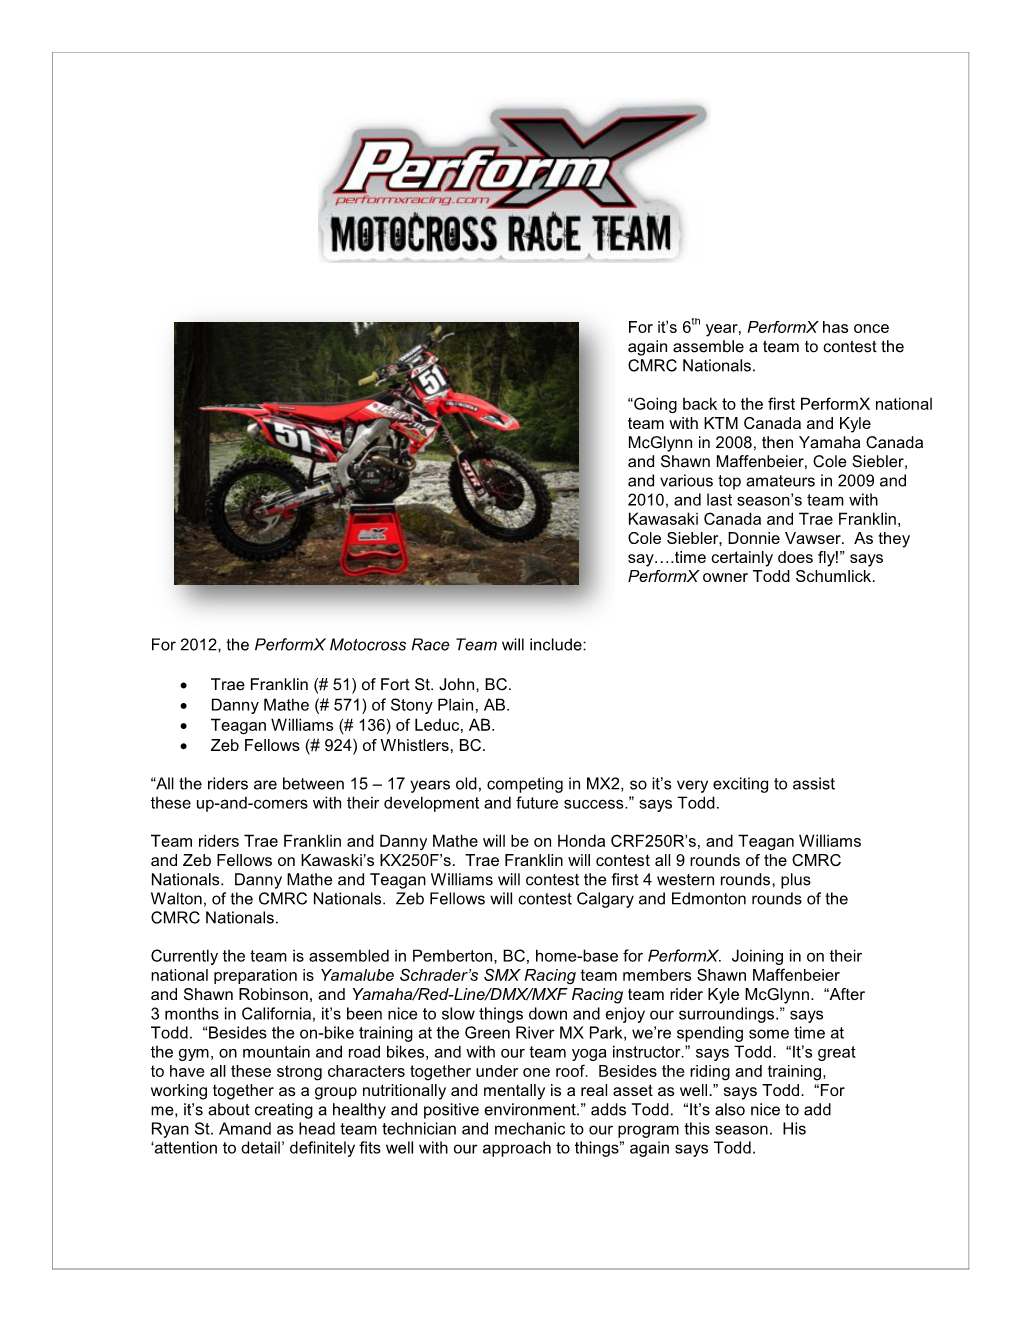 For 2012, the Performx Motocross Race Team Will Include: • Trae Franklin (# 51) of Fort St. John, BC. • Danny Mathe (# 57